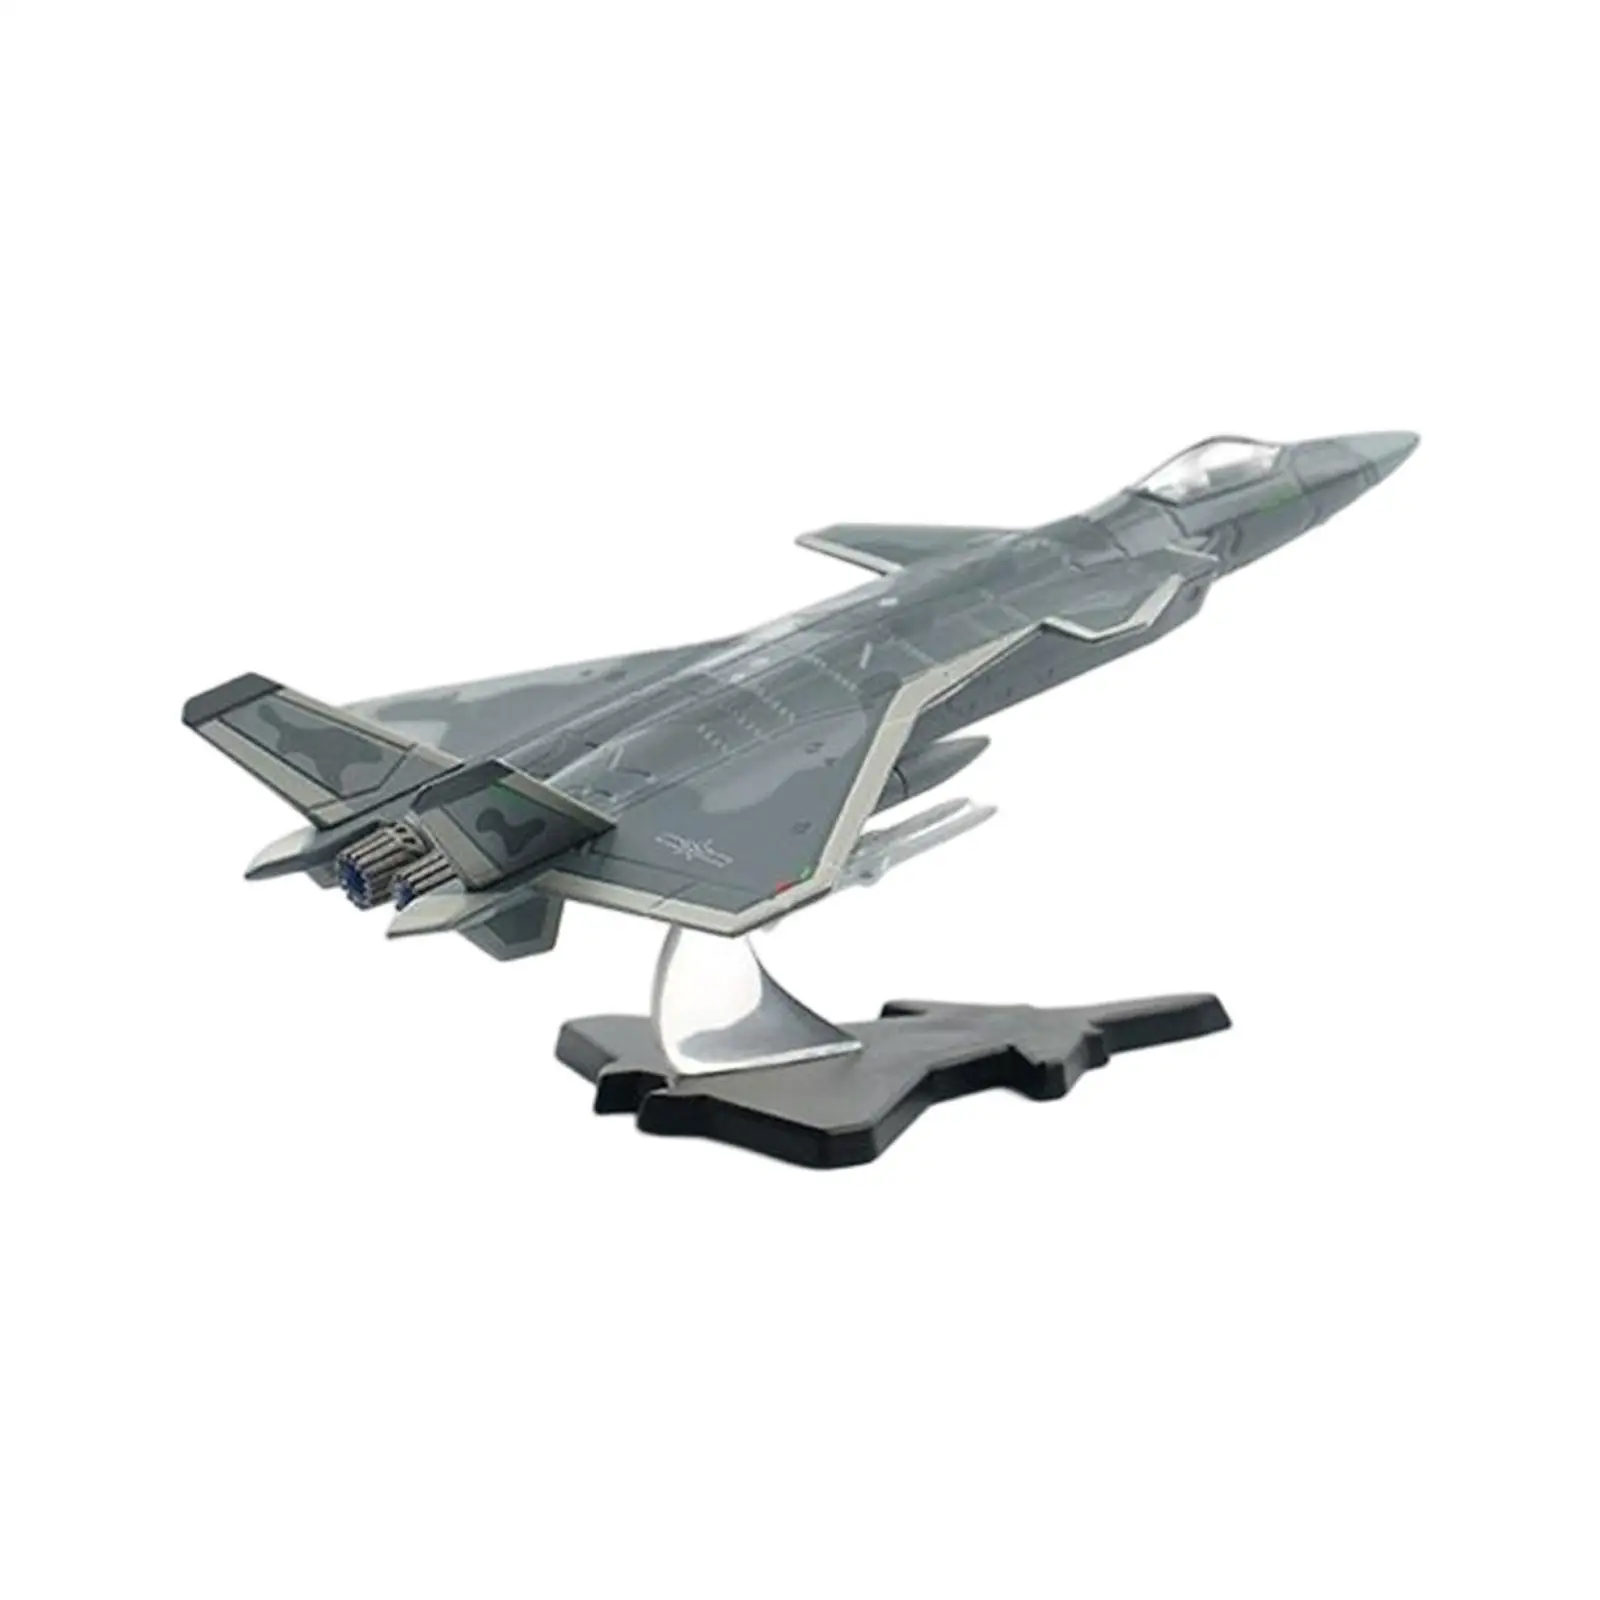 Alloy Plane Model J20 Diecast Plane Collectables Ornaments Fighter Model for Shelf Bedroom Home Holiday Gifts Collection